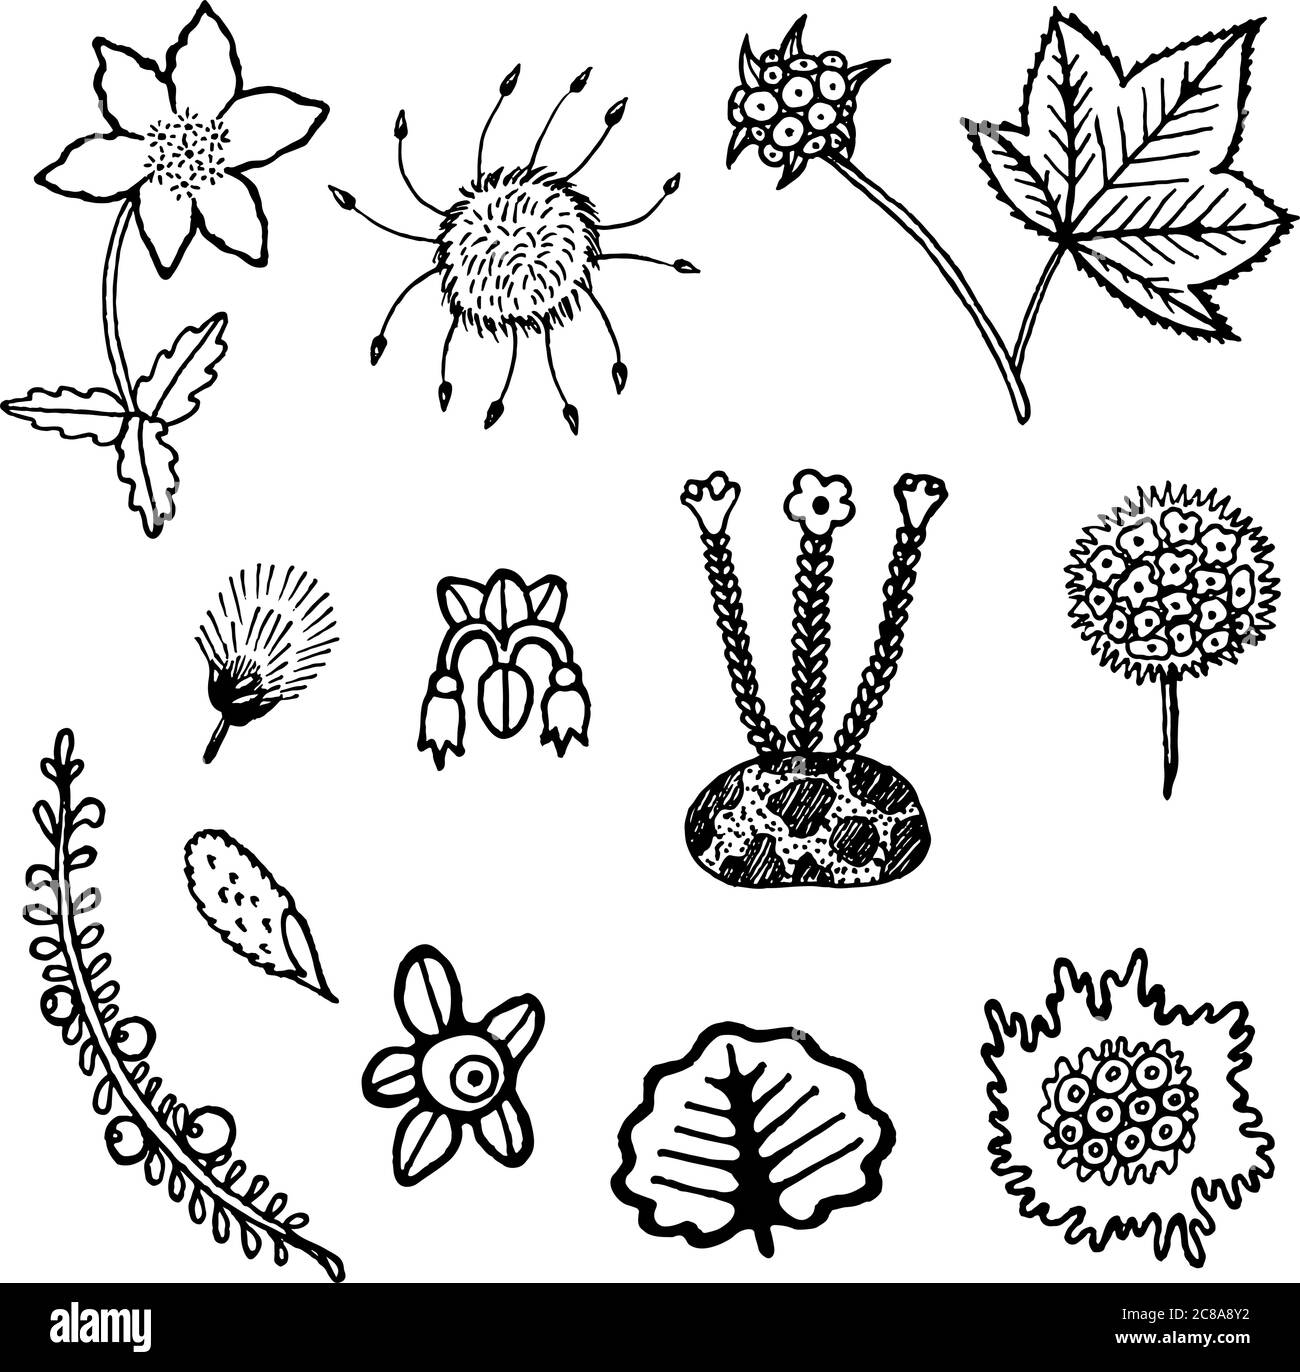 North tundra plant element collection Stock Vector